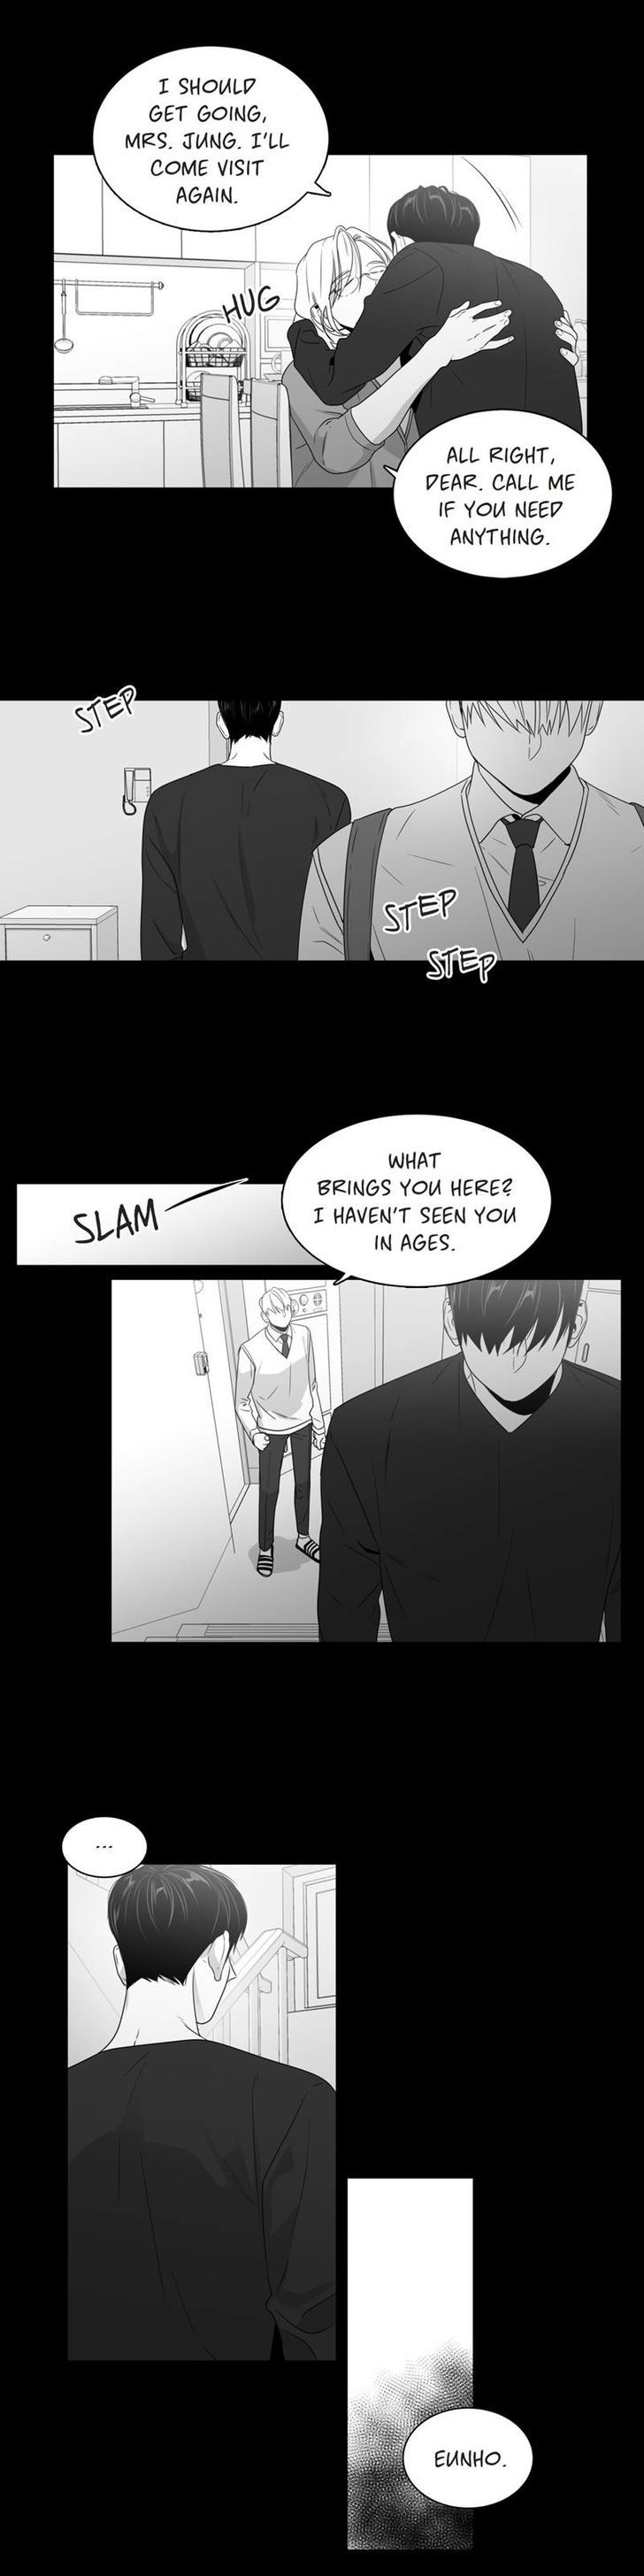 Lover Boy (Lezhin) Chapter 066 page 1